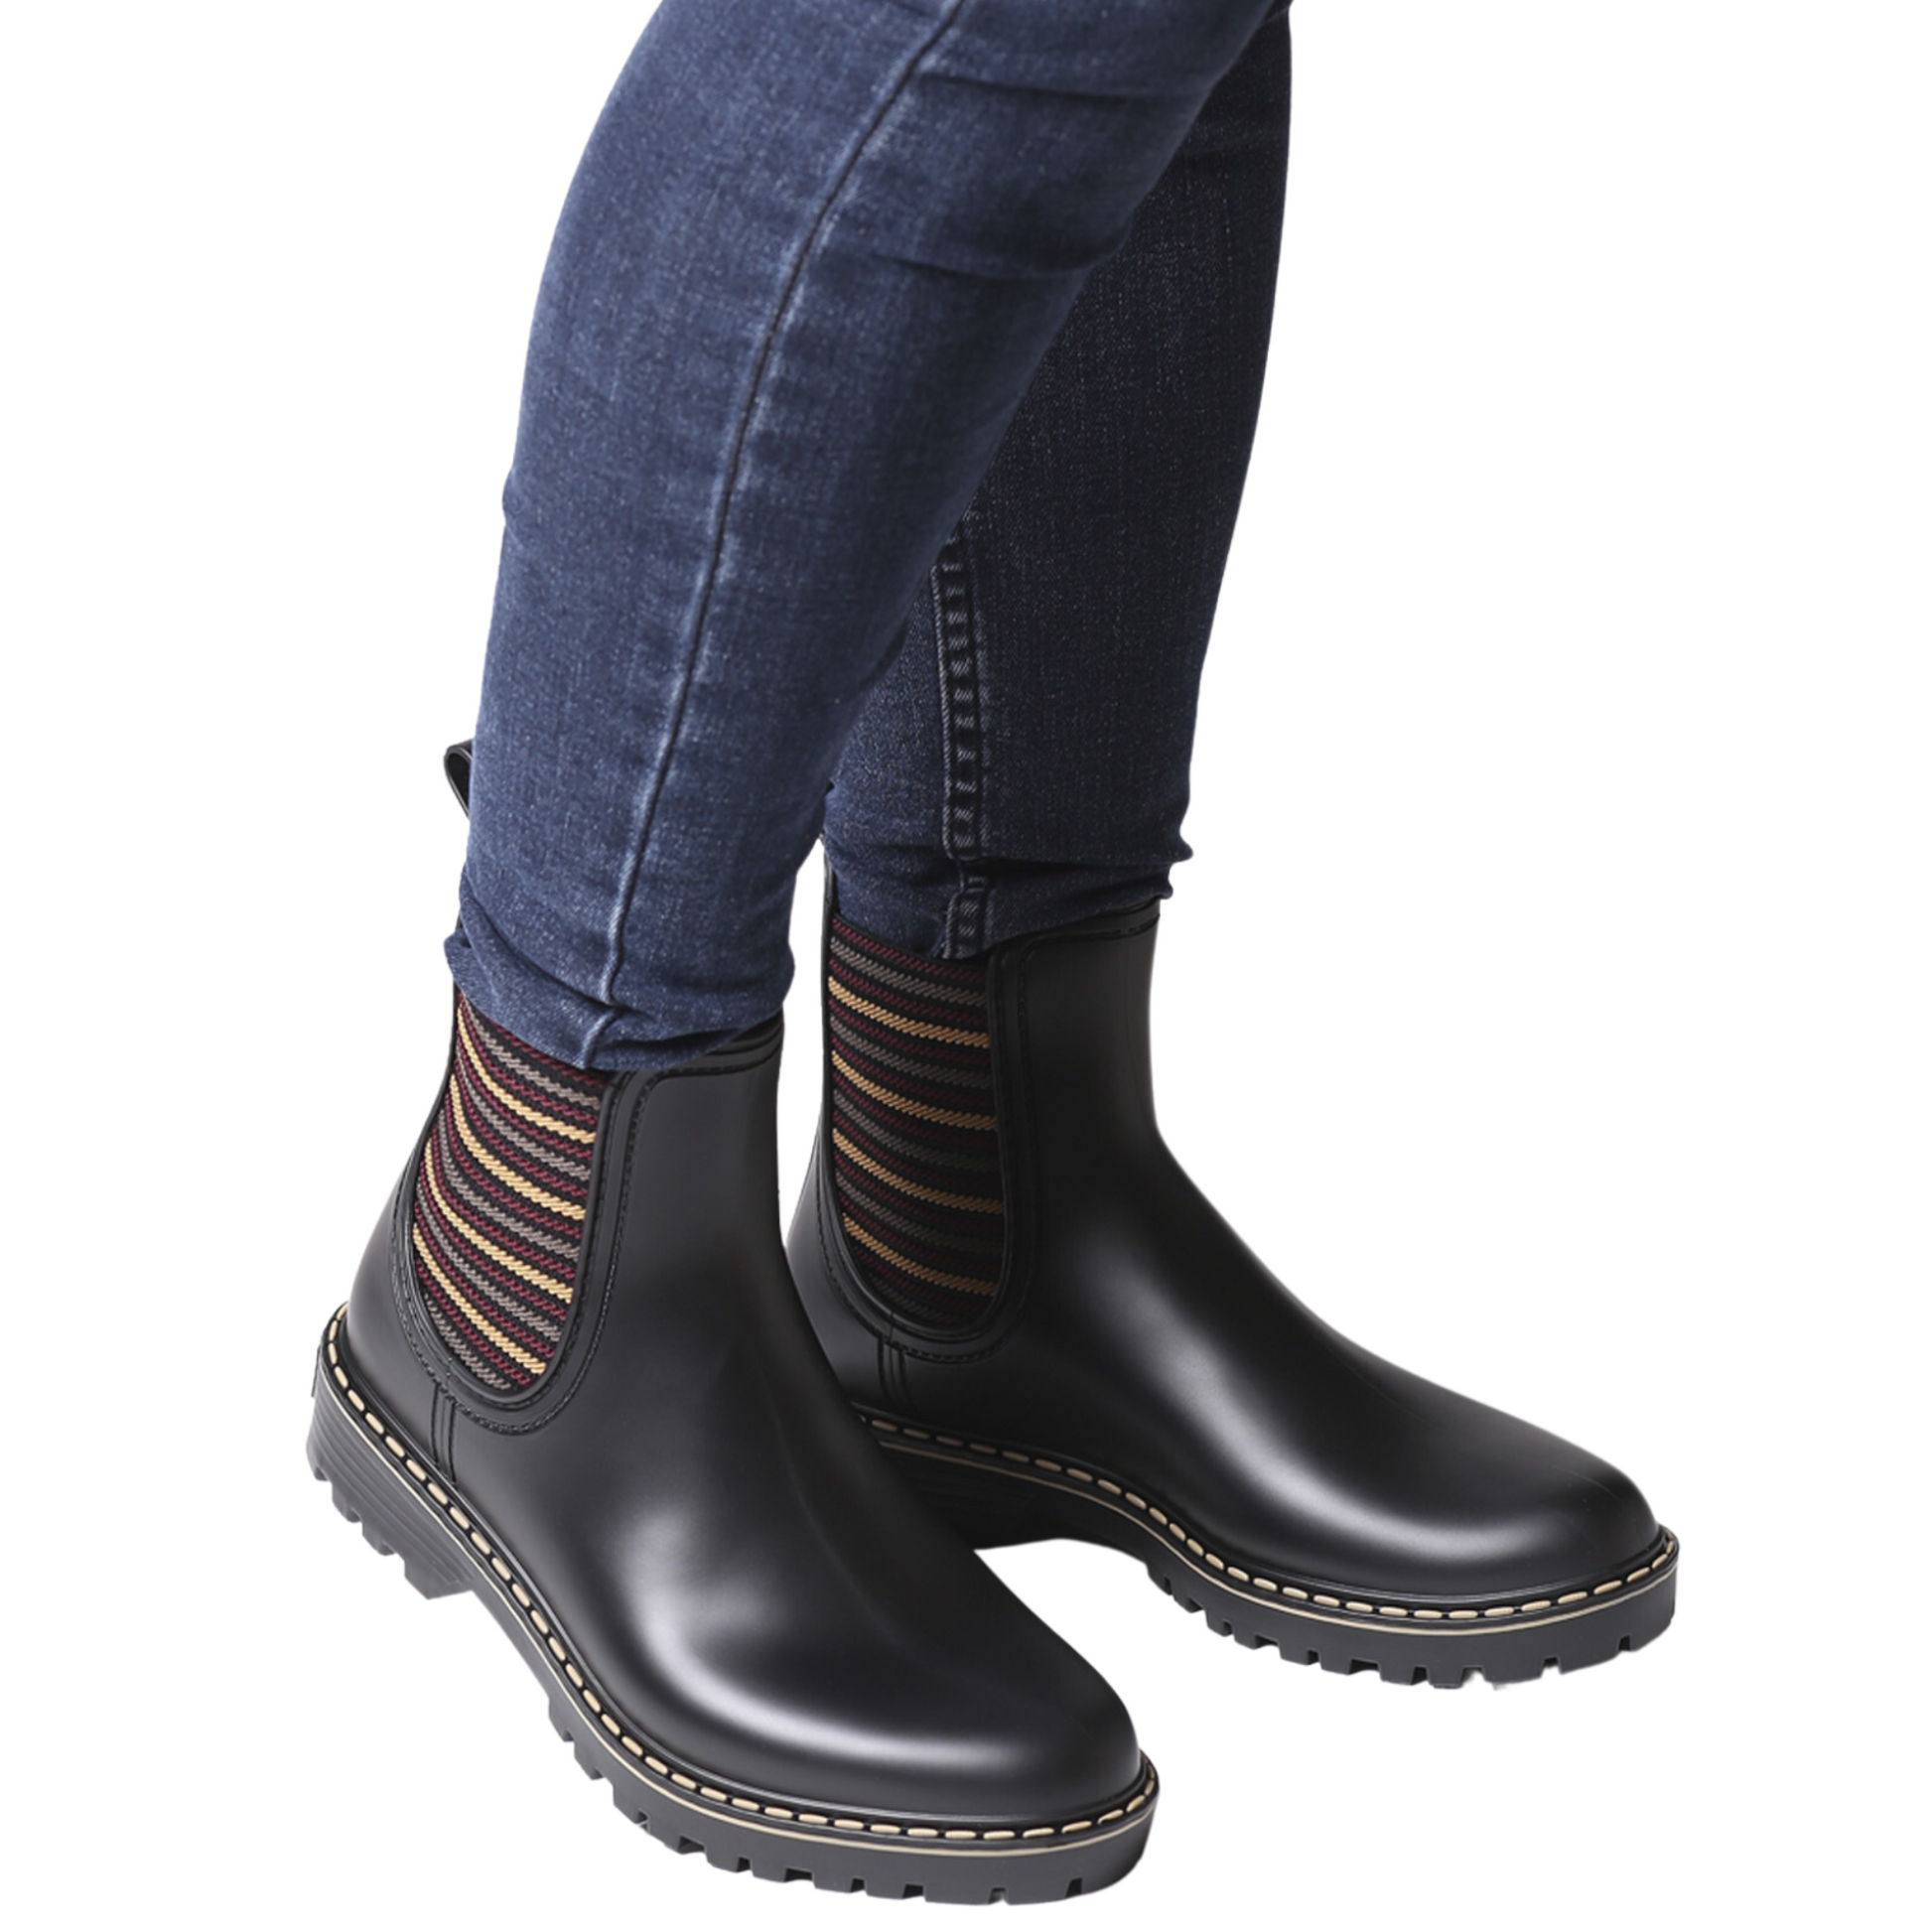 View of a pair of short black rain boots with striped elastic side gores being modelled by a person wearing jeans